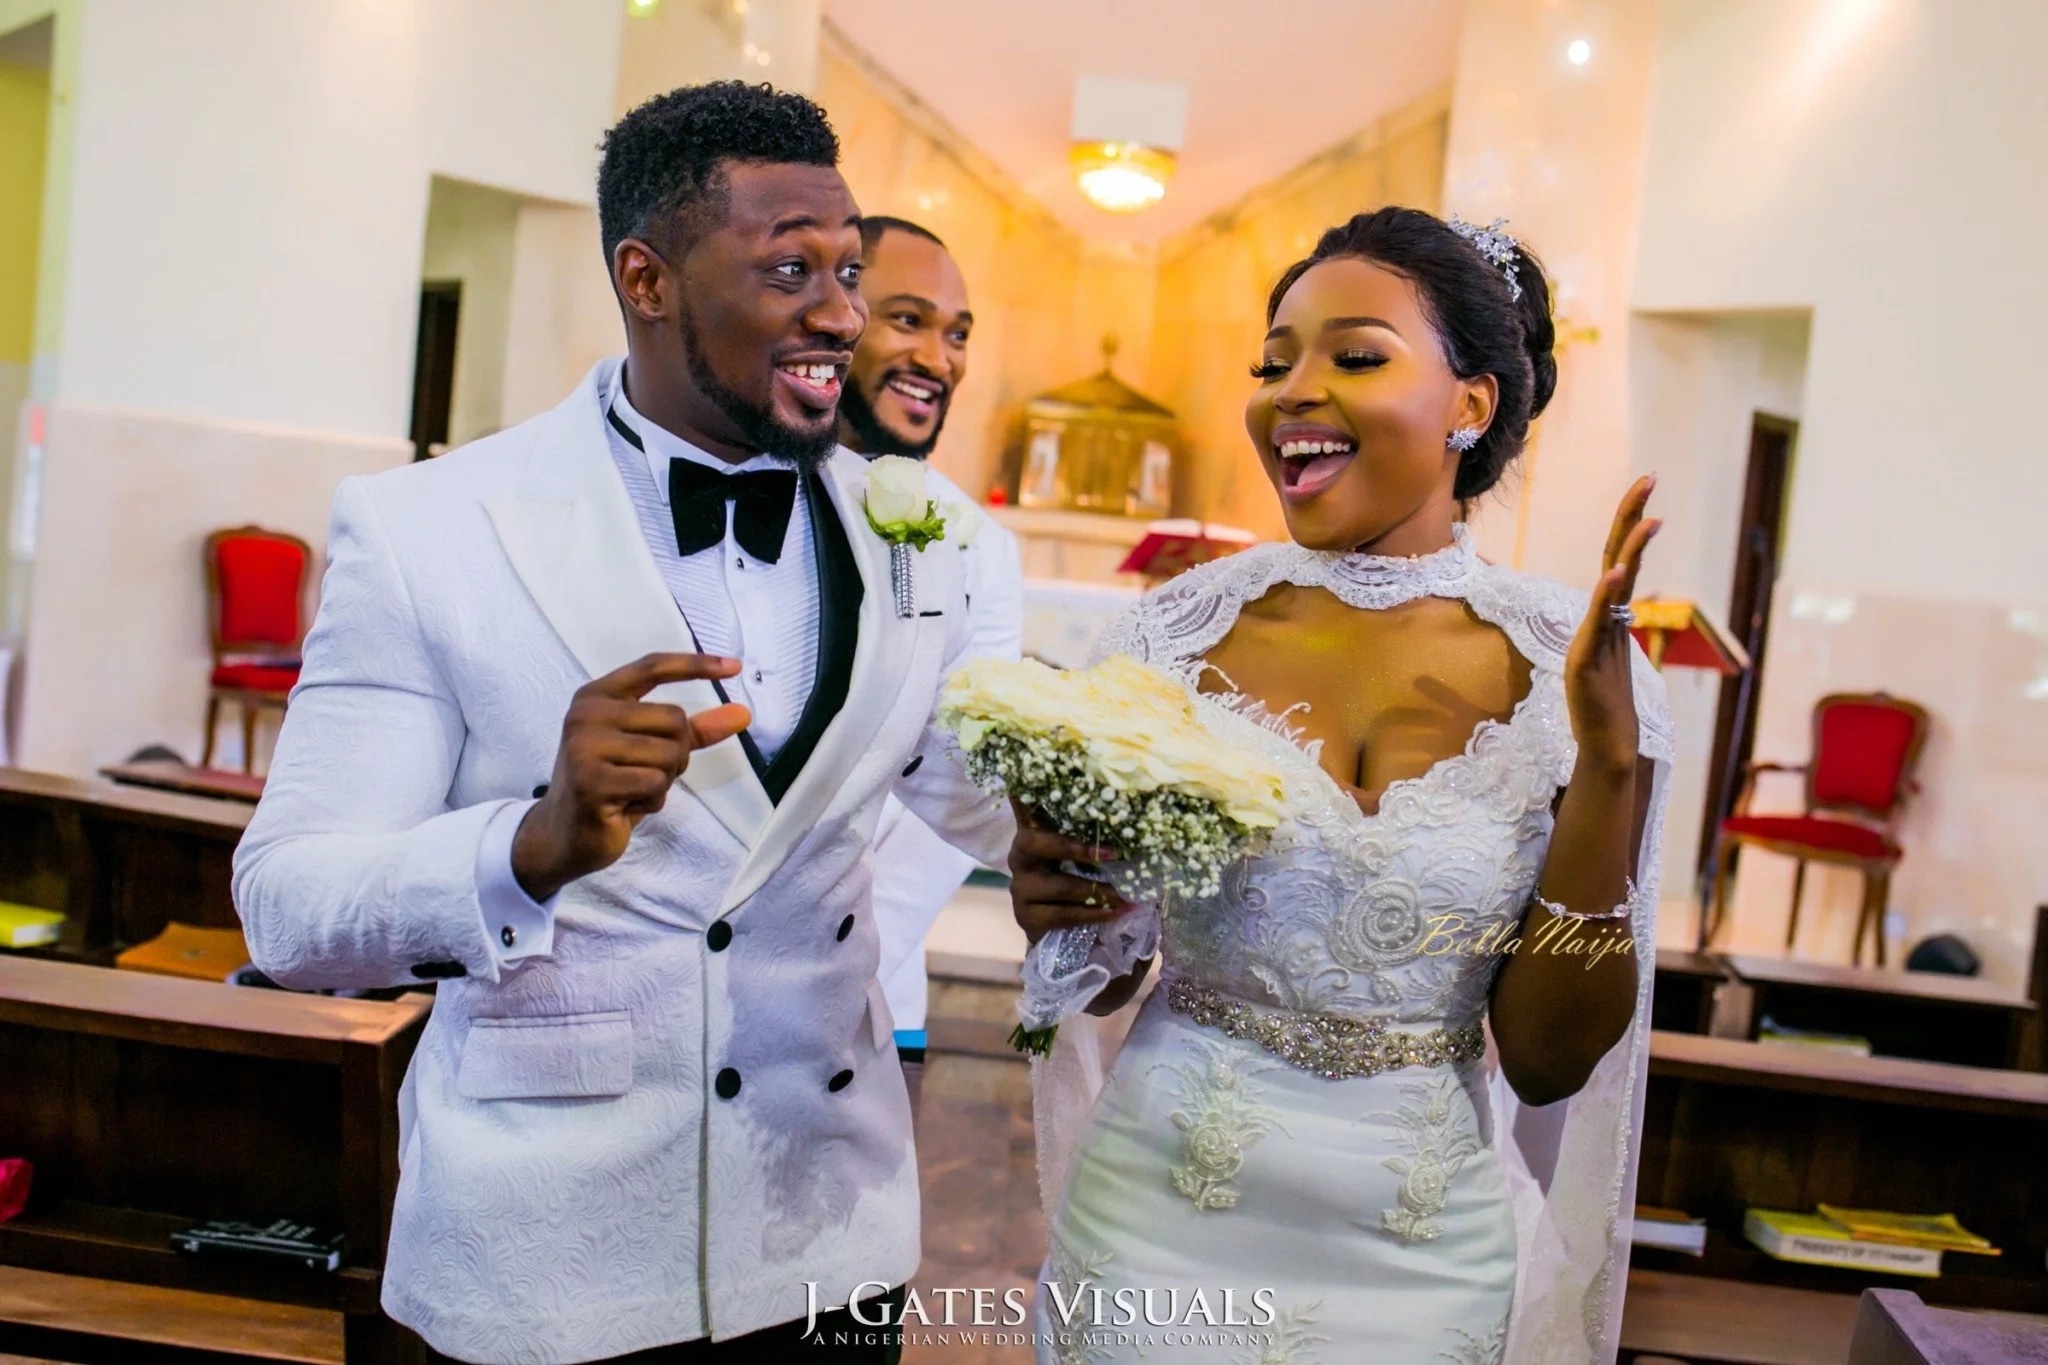 More photos from wedding of actor Daniel K Daniel and wife in Lagos ▷  Legit.ng